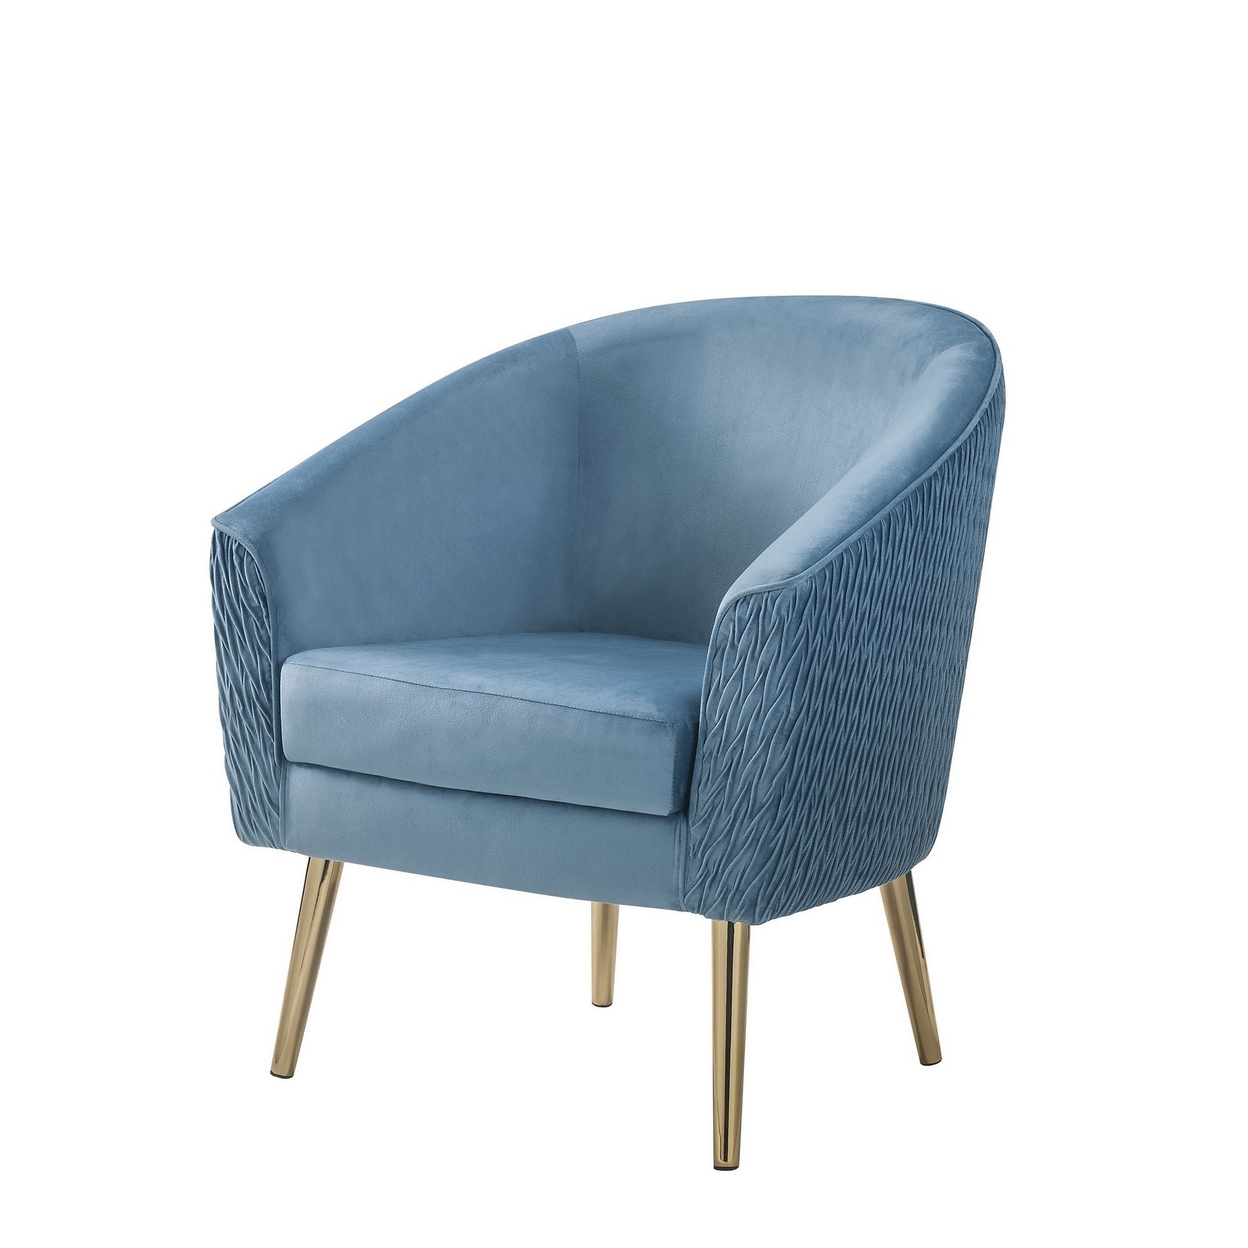 Accent Chair With Velvet Upholstery And Metal Legs, Blue- Saltoro Sherpi